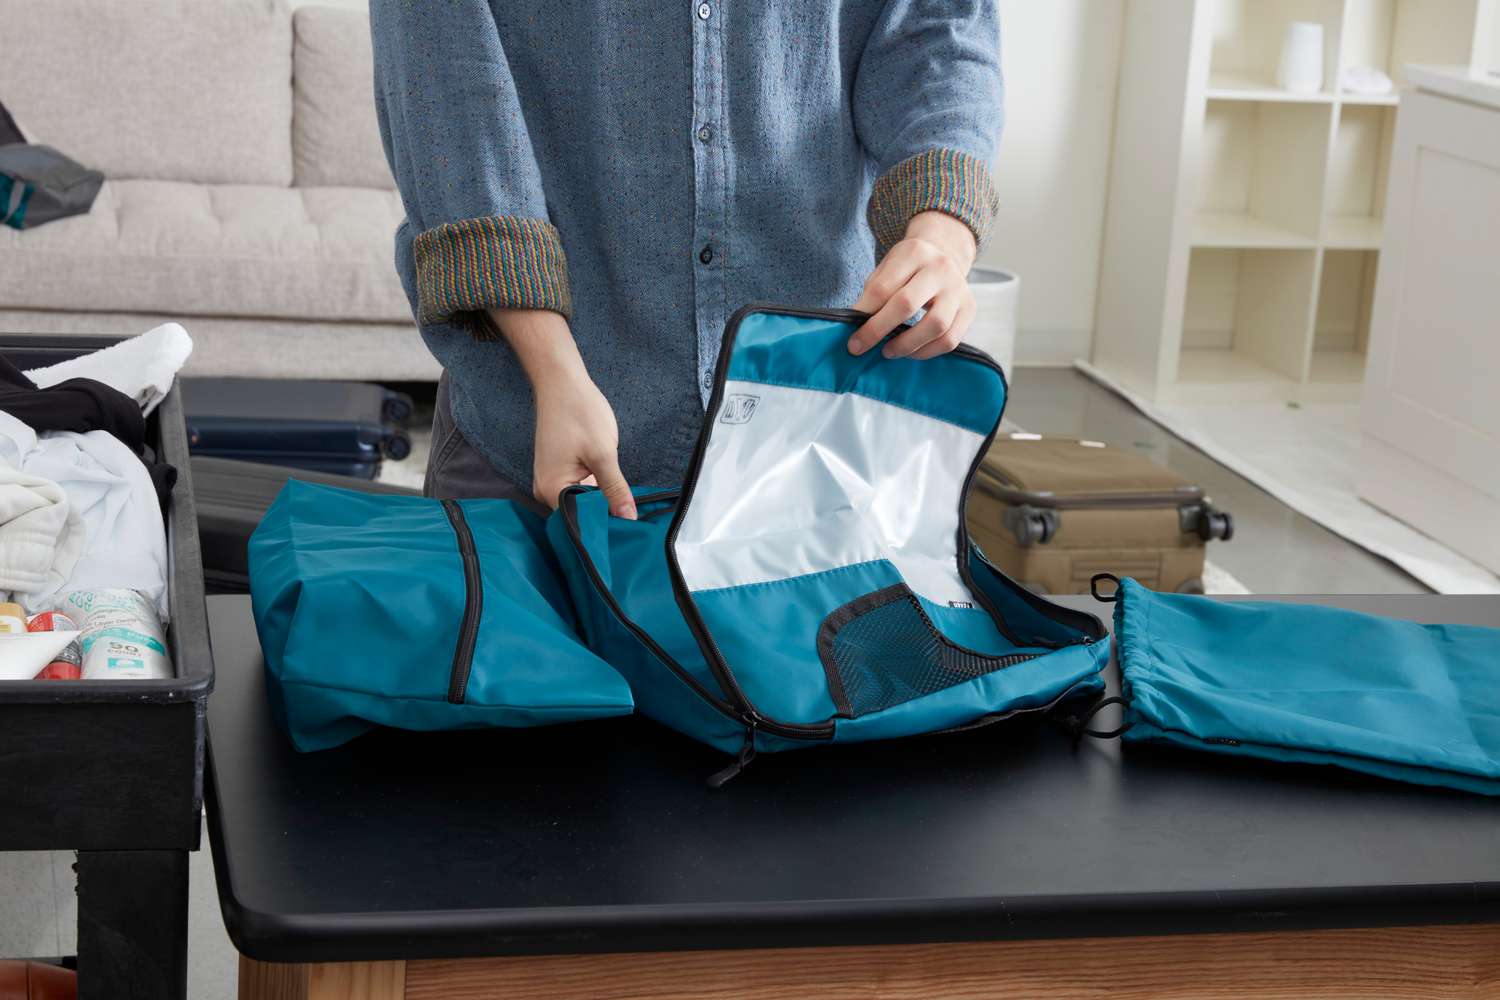 Person unzipping a Veken Packing Cube beside laundry and shoe bag on a black tabletop